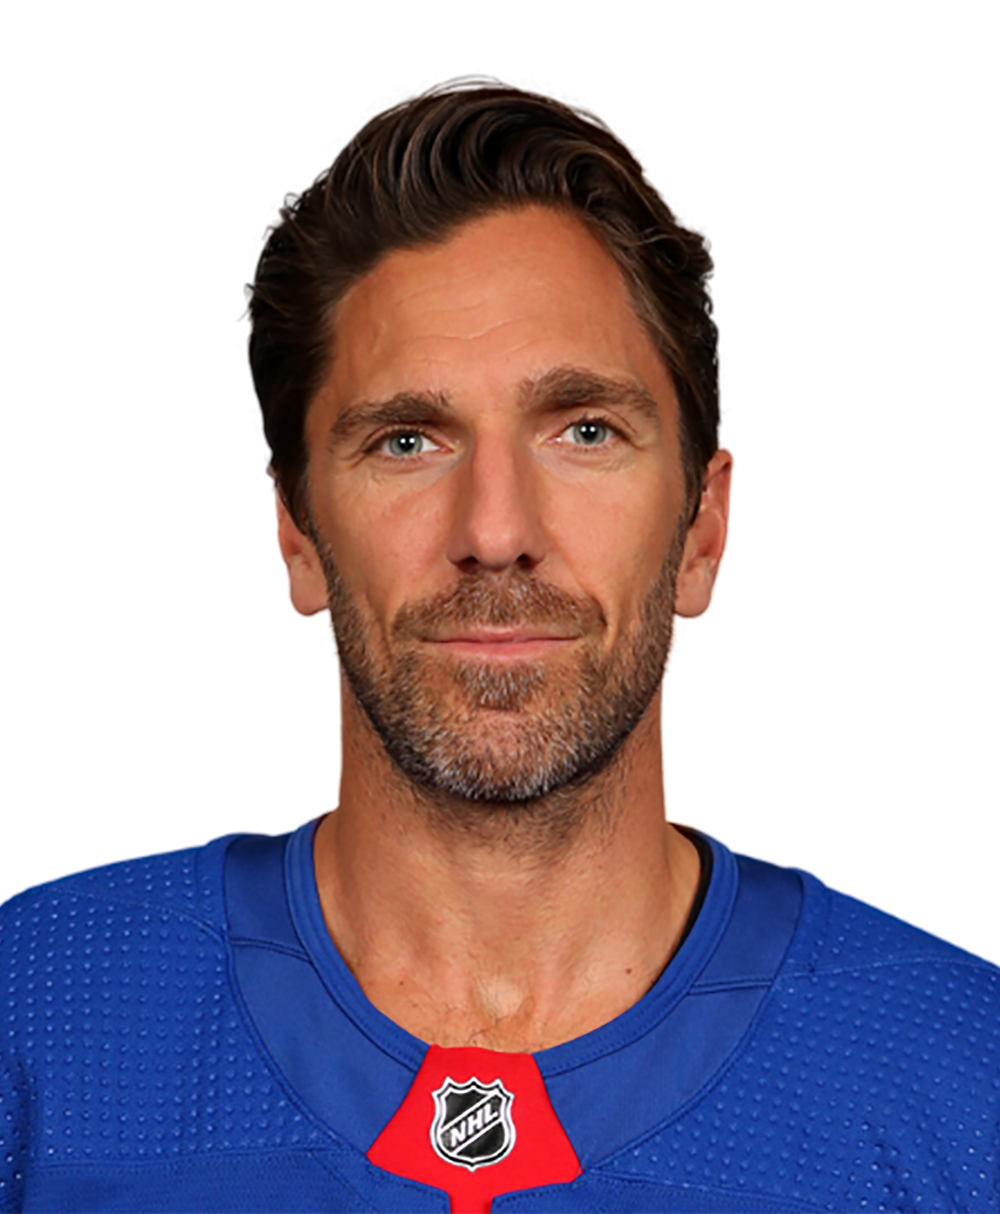 Lundqvist is 11th player in Rangers history to have jersey retired